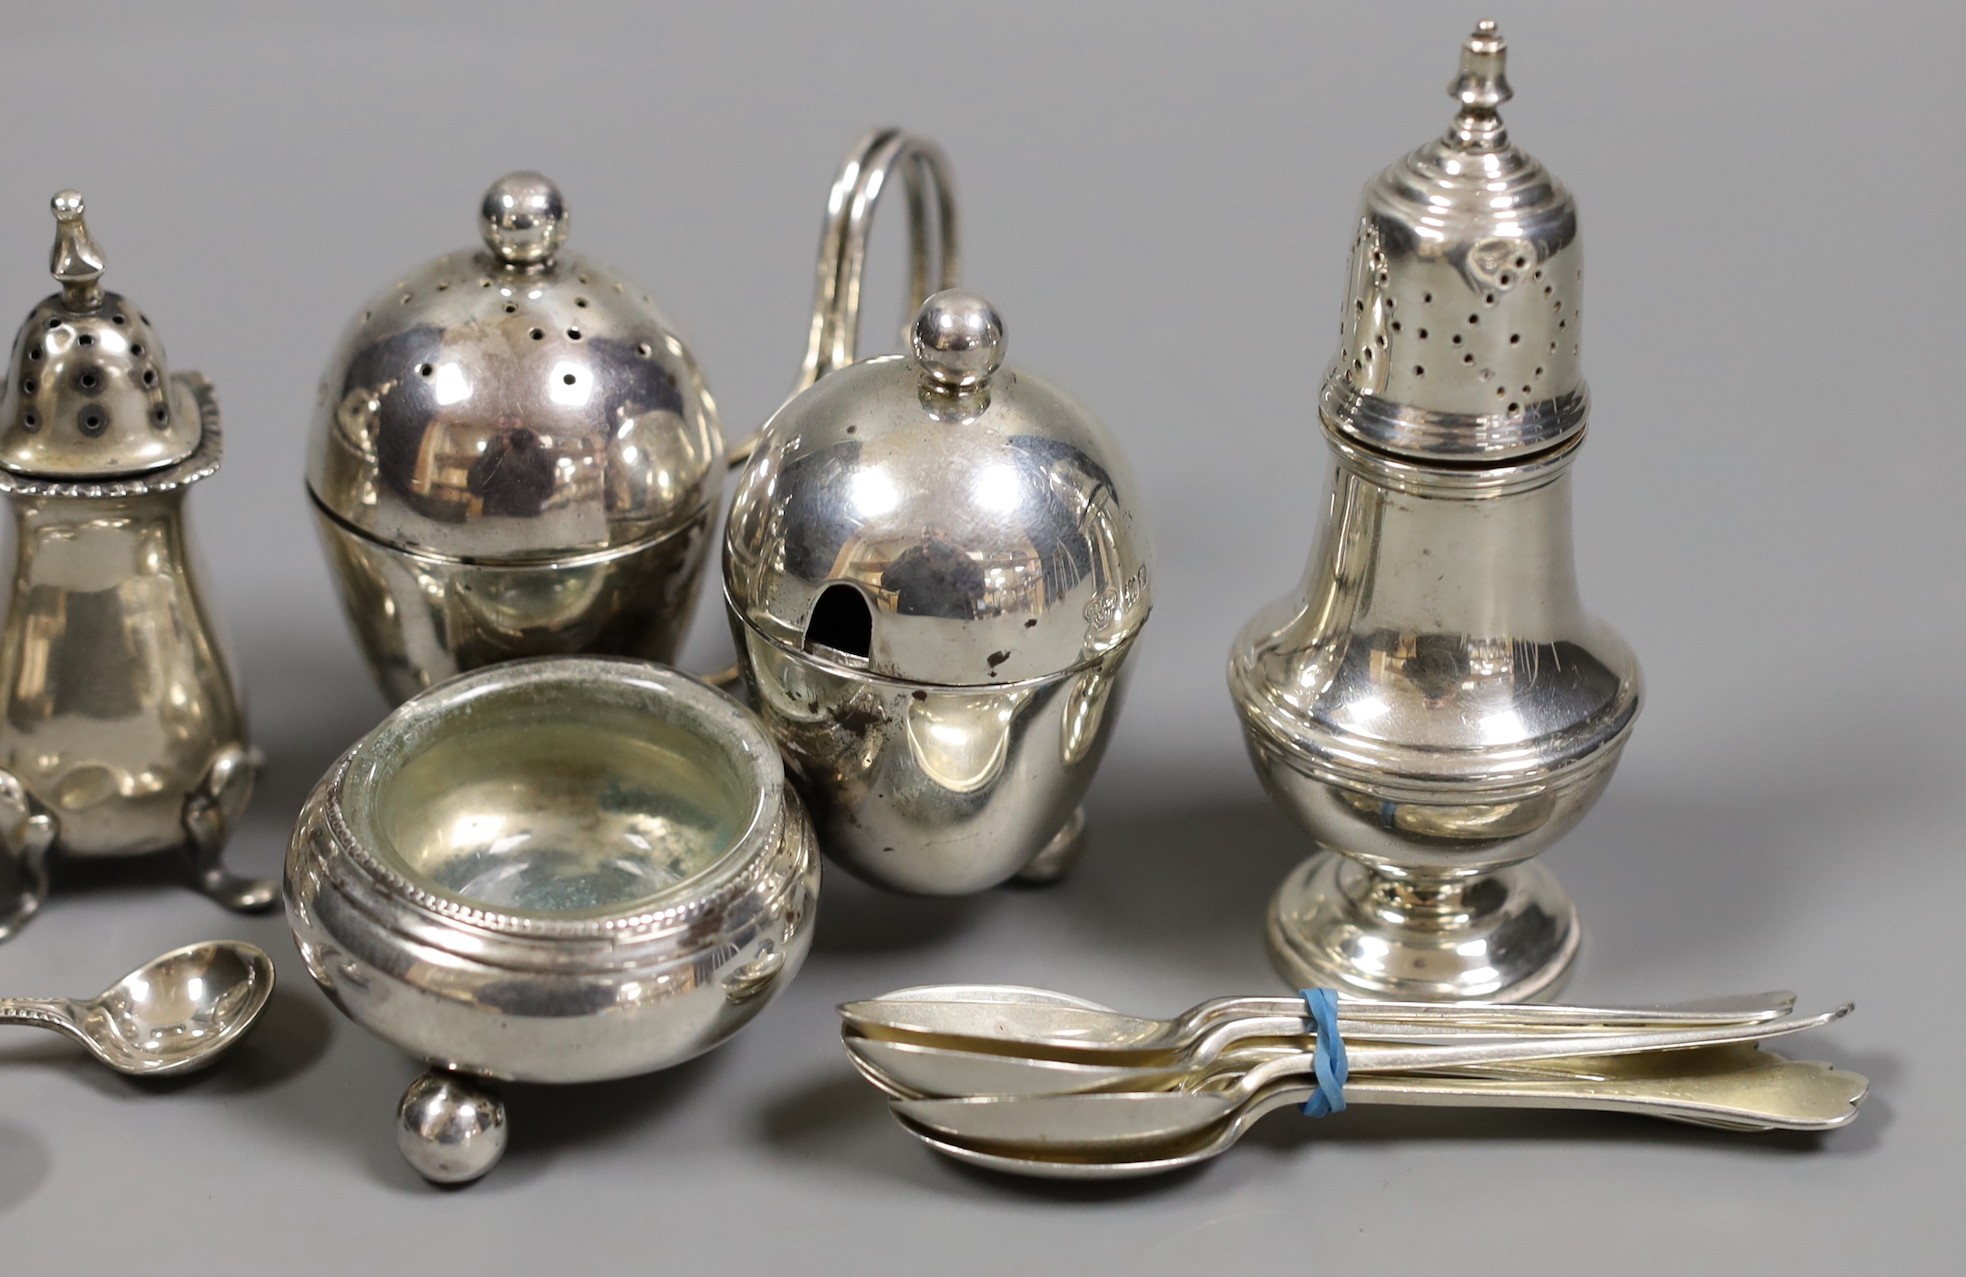 An Edwardian silver cruet stand, by Goldsmiths & Silversmiths, London, 1901, four other silver condiments and a set of six silver coffee spoons.